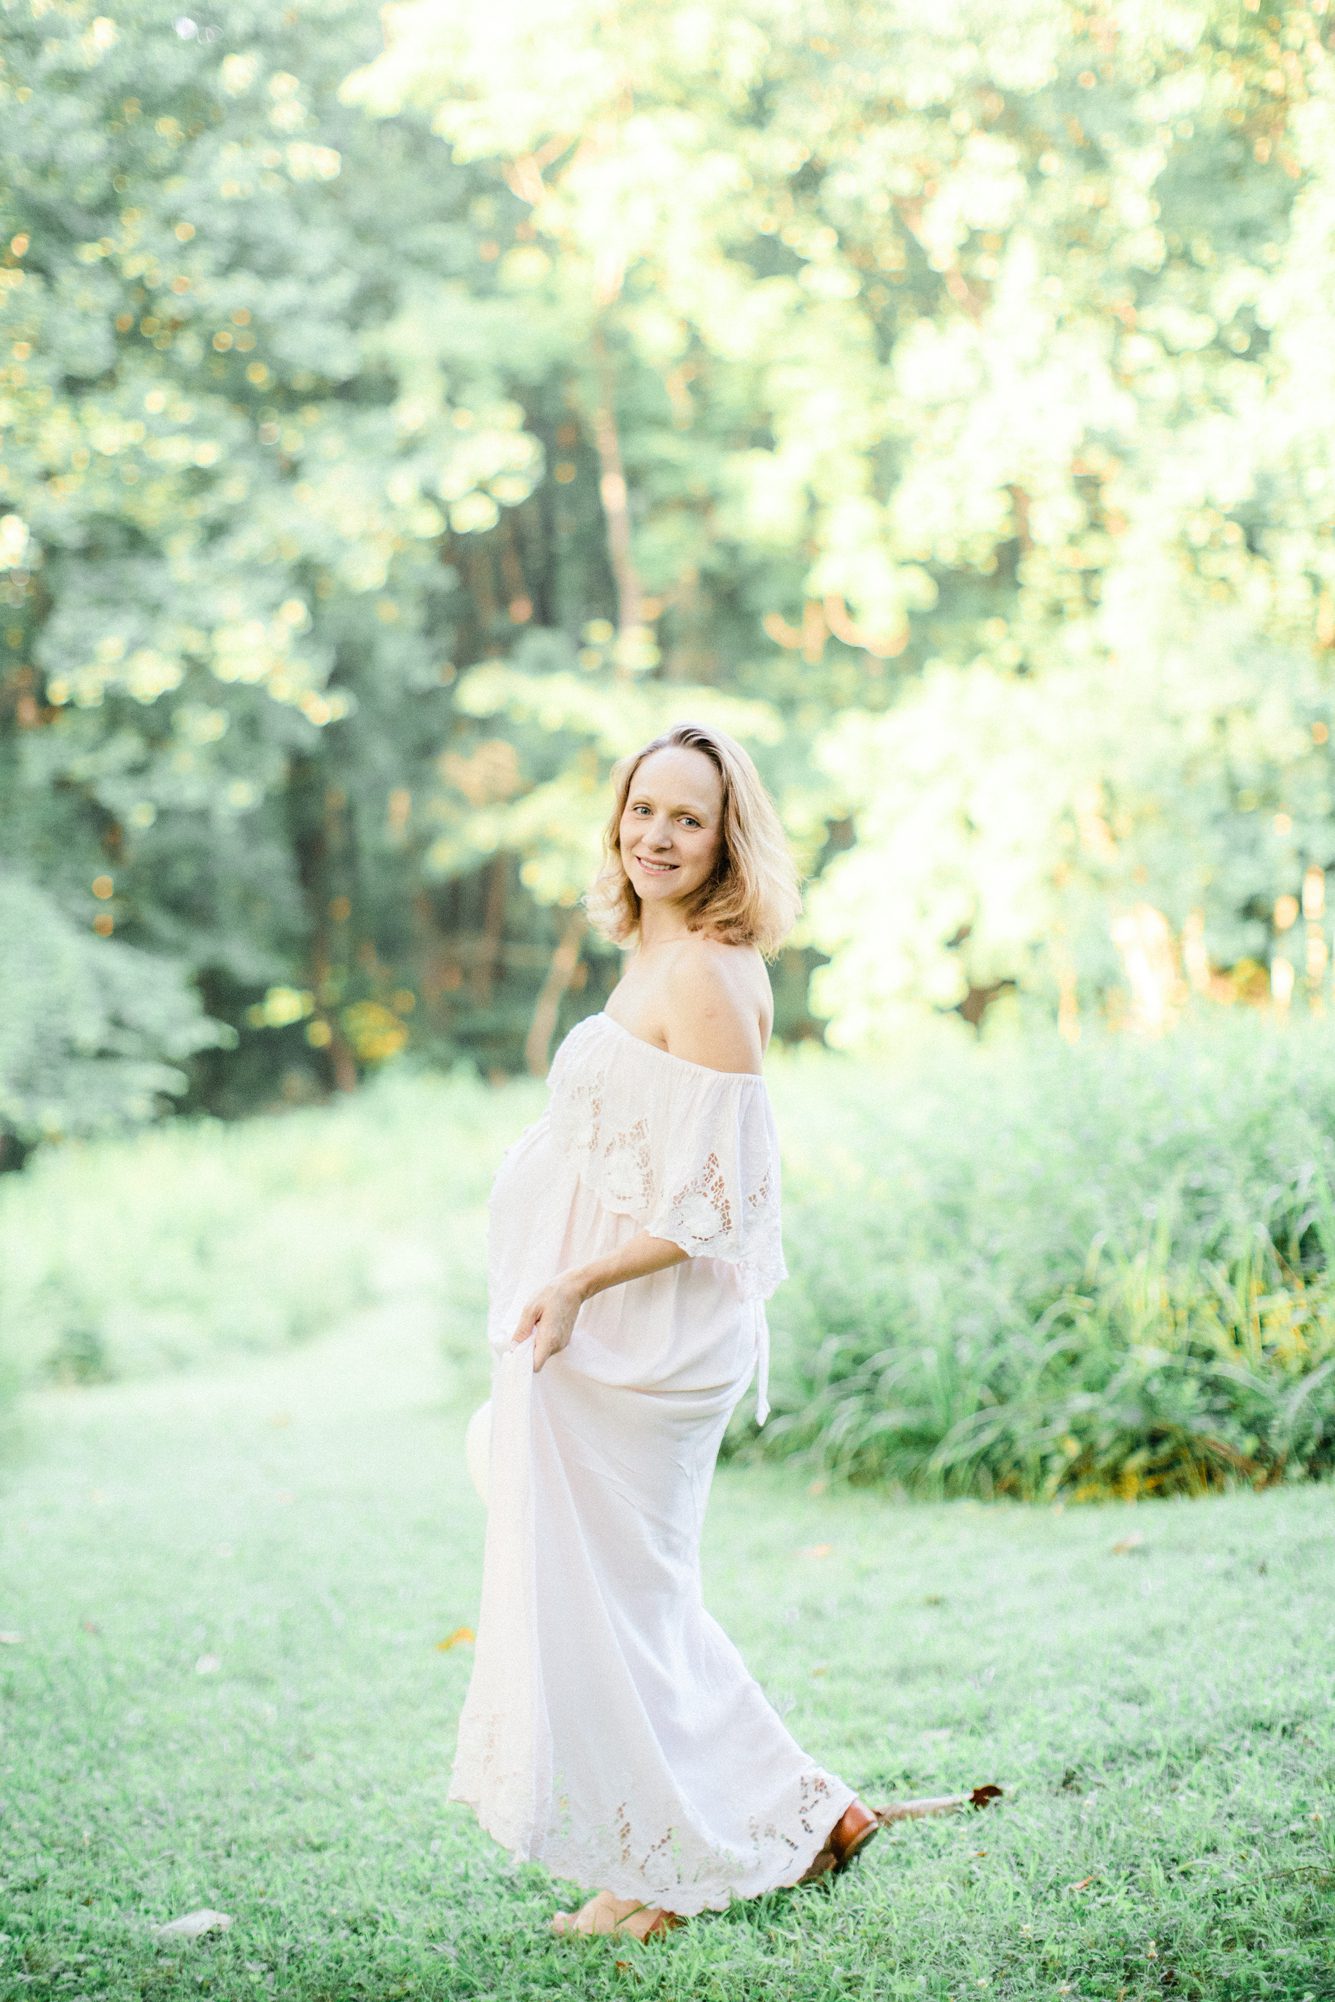 Mom walking in field holding dress during maternity session. Photo by LRG Portraits.